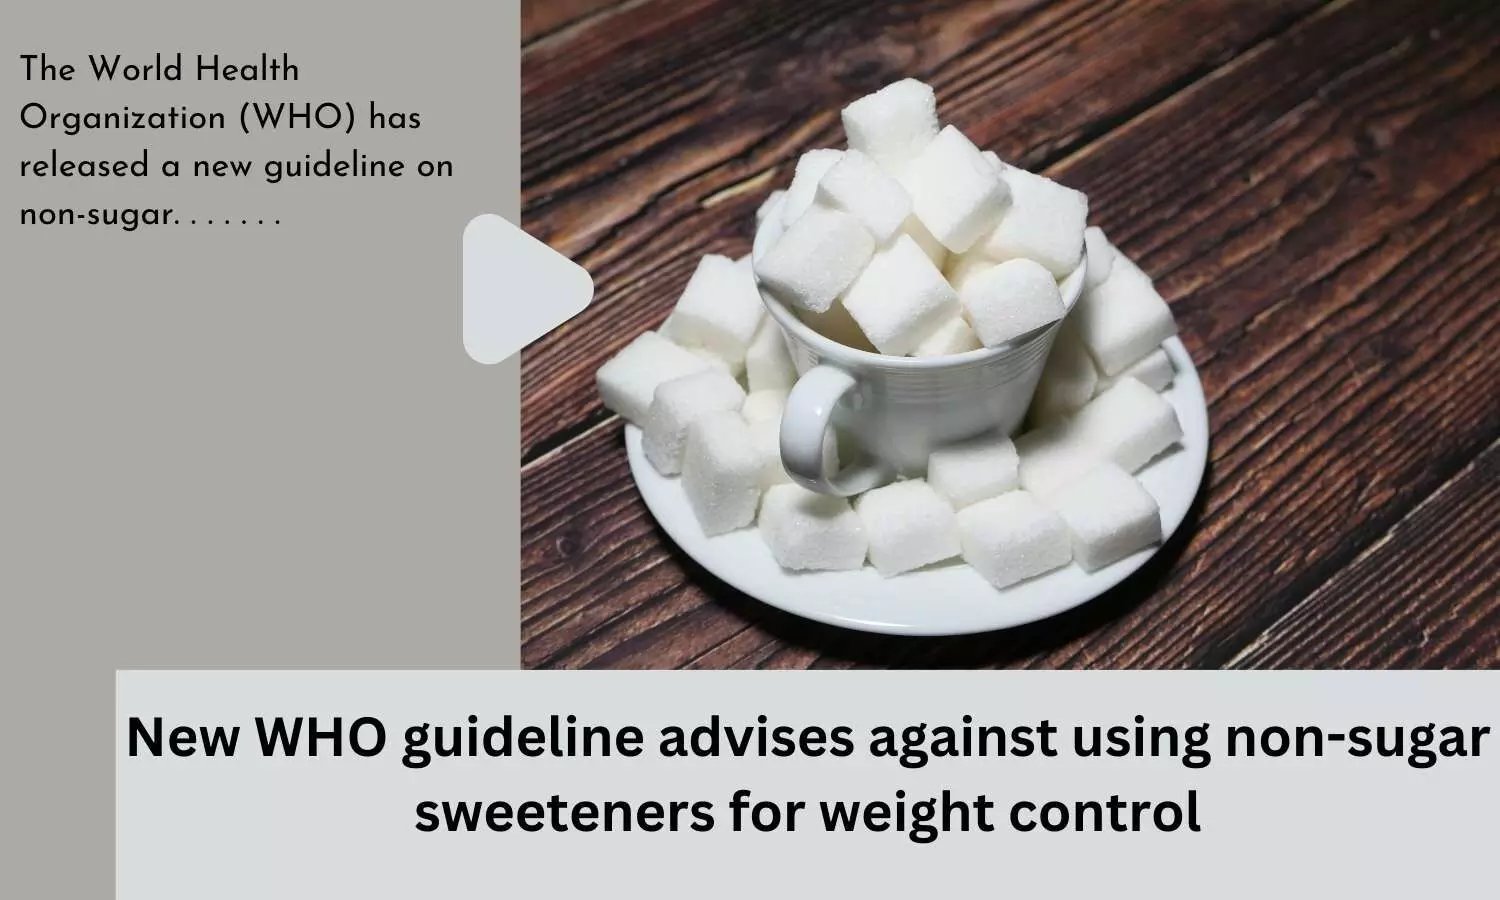 New WHO guideline advises against using non-sugar sweeteners for weight control